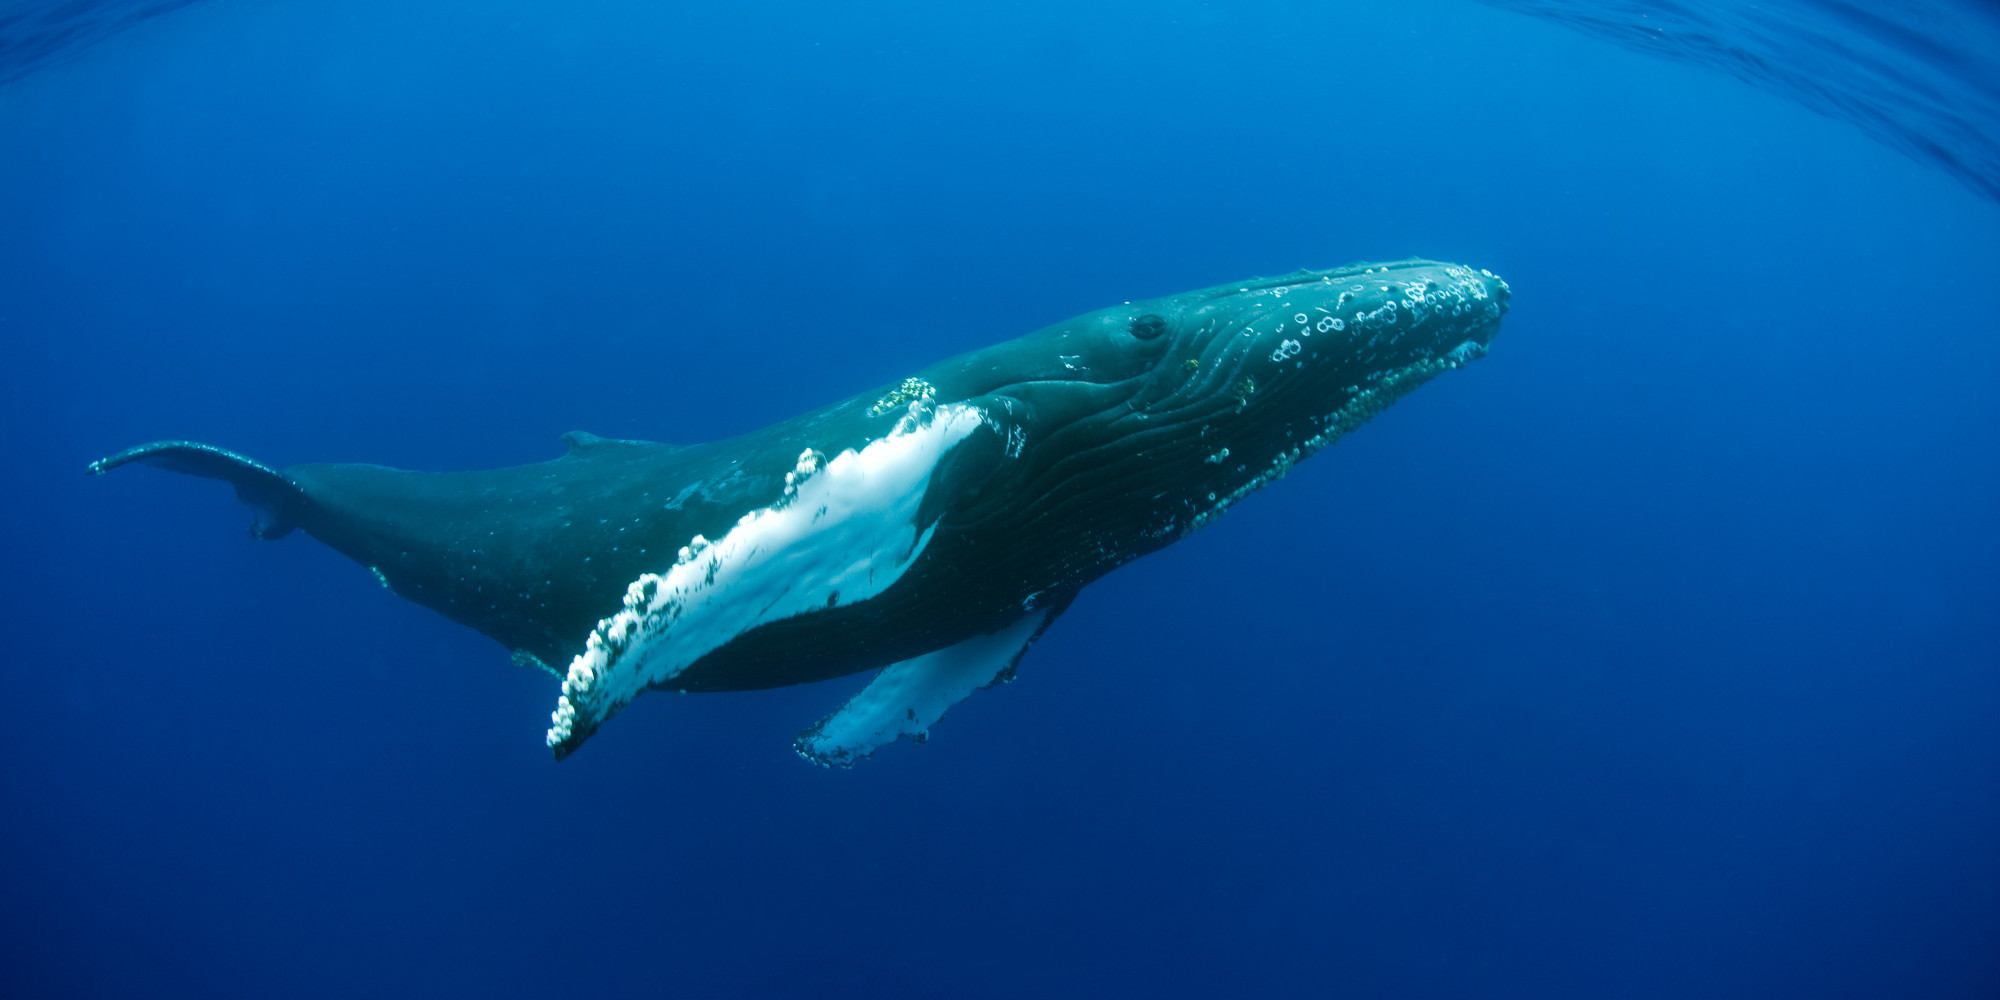 Most humpback whales to be removed from endangered species list, others remain